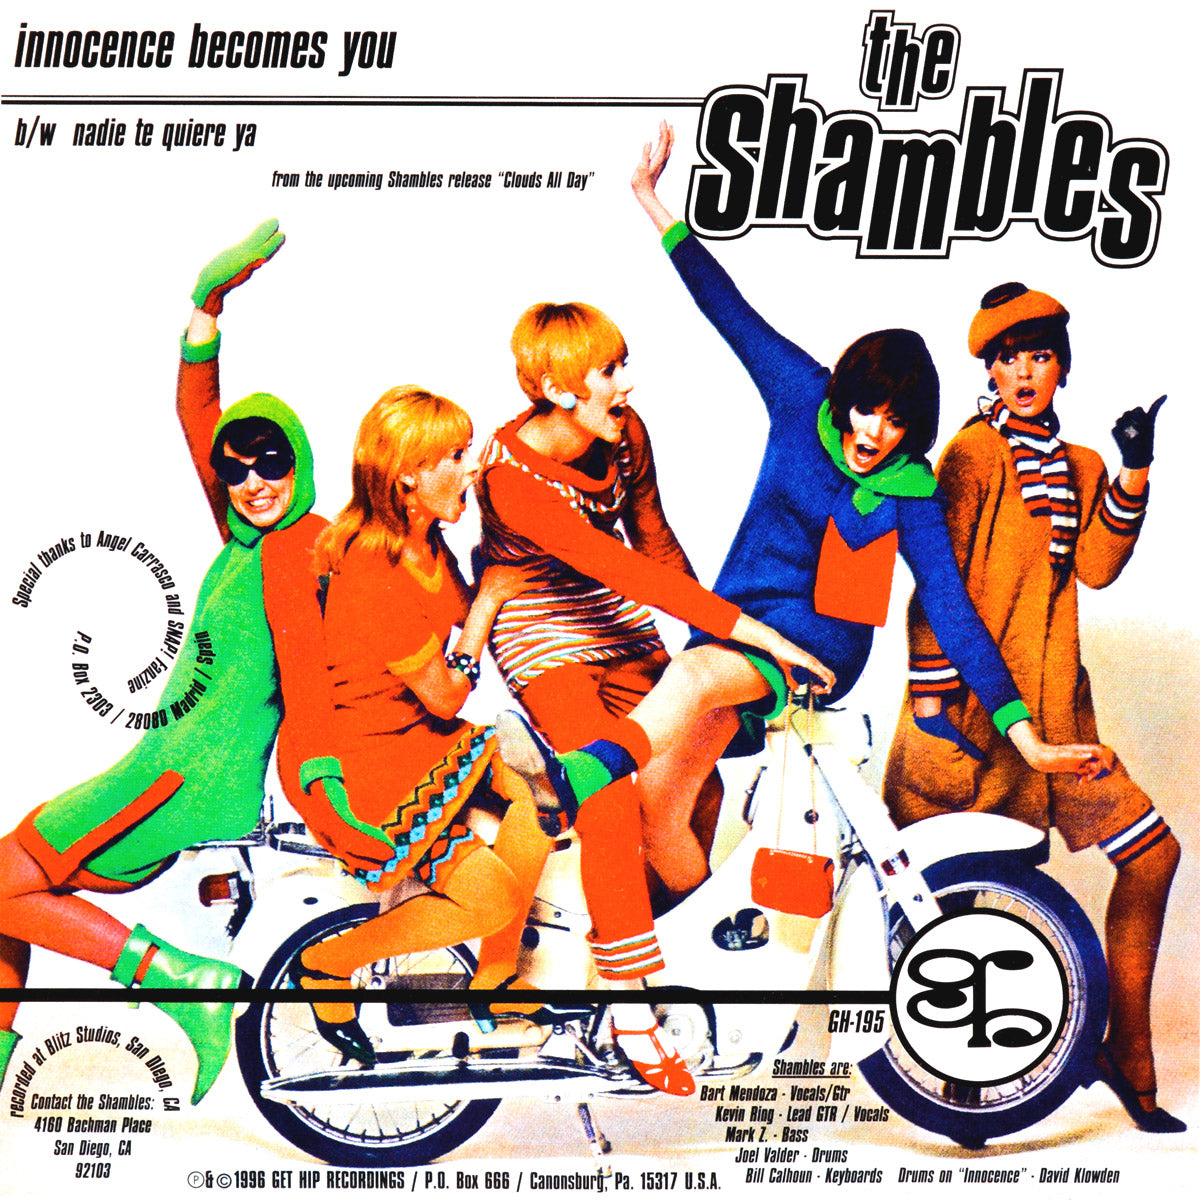 Shambles- Innocence Becomes You 7” ~EX MANUAL SCAN!